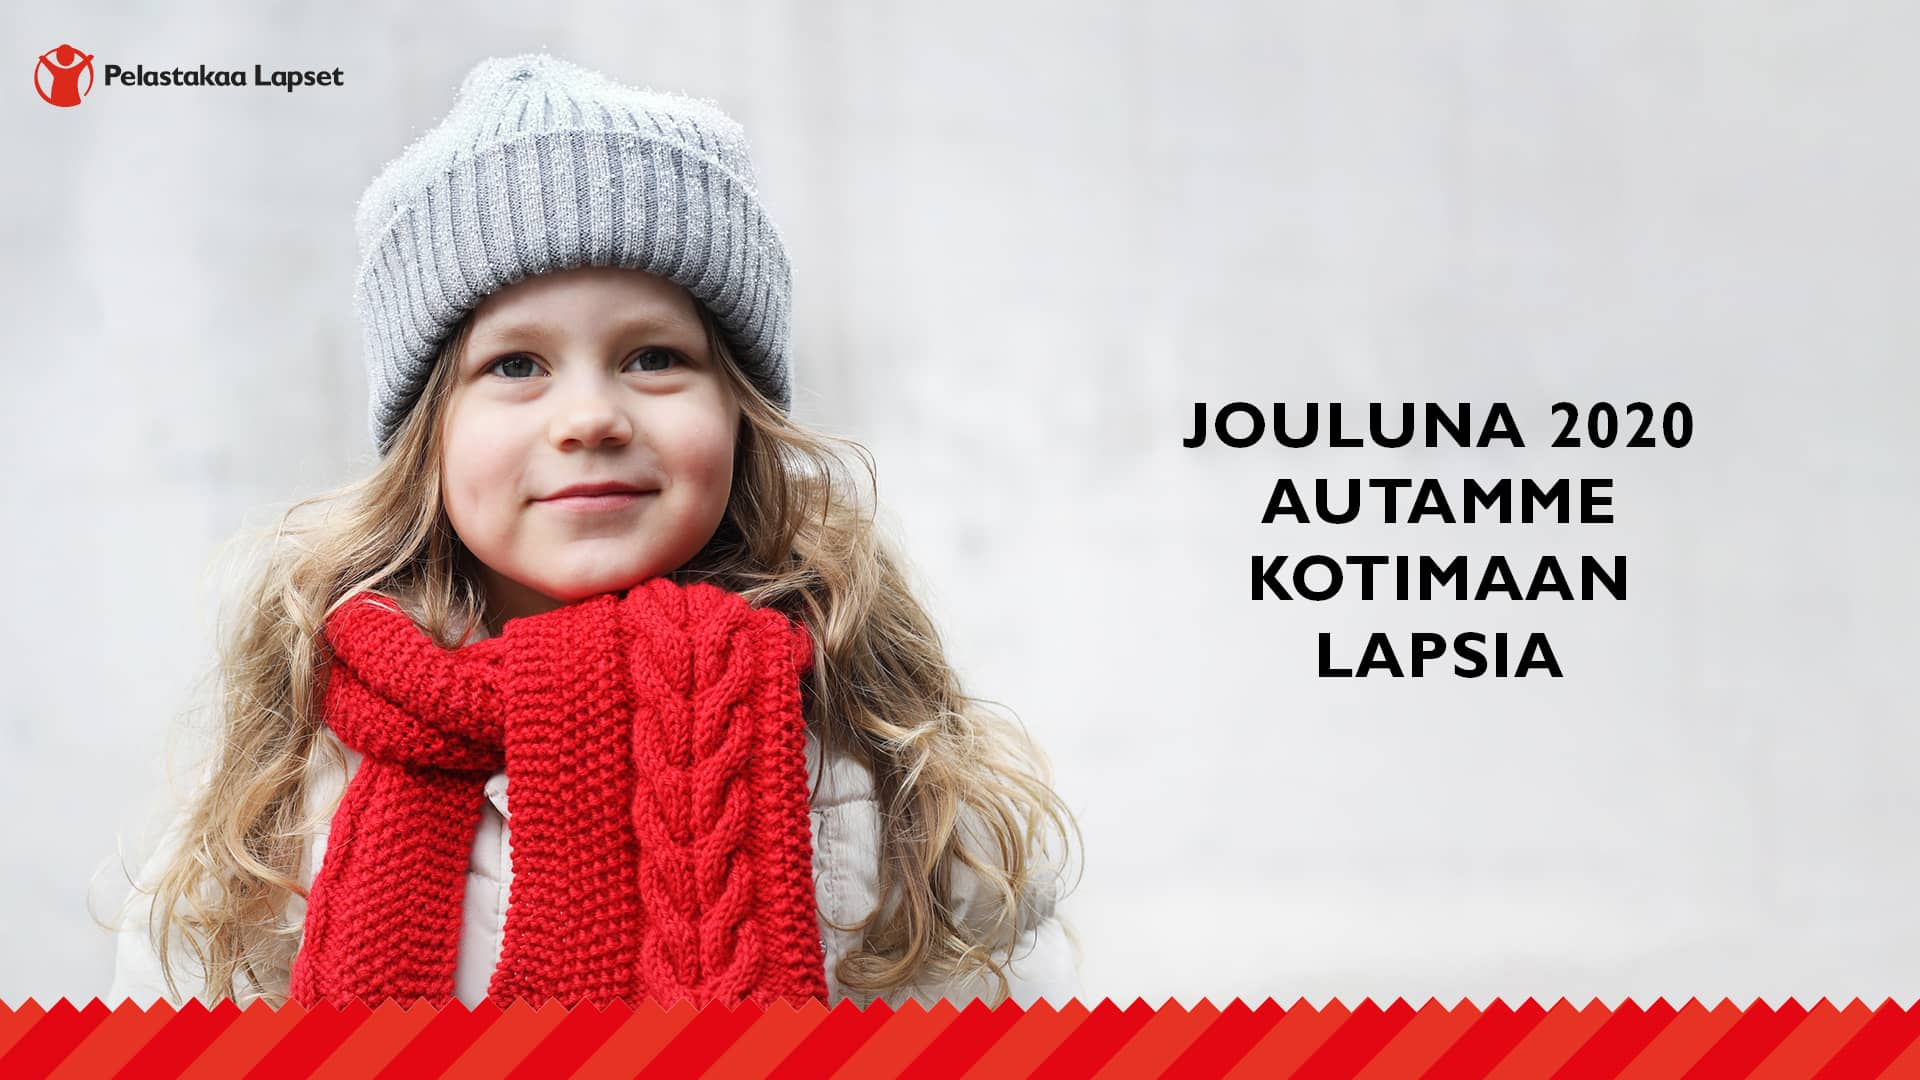 You are currently viewing Hyvää joulua 2020 kaikille!